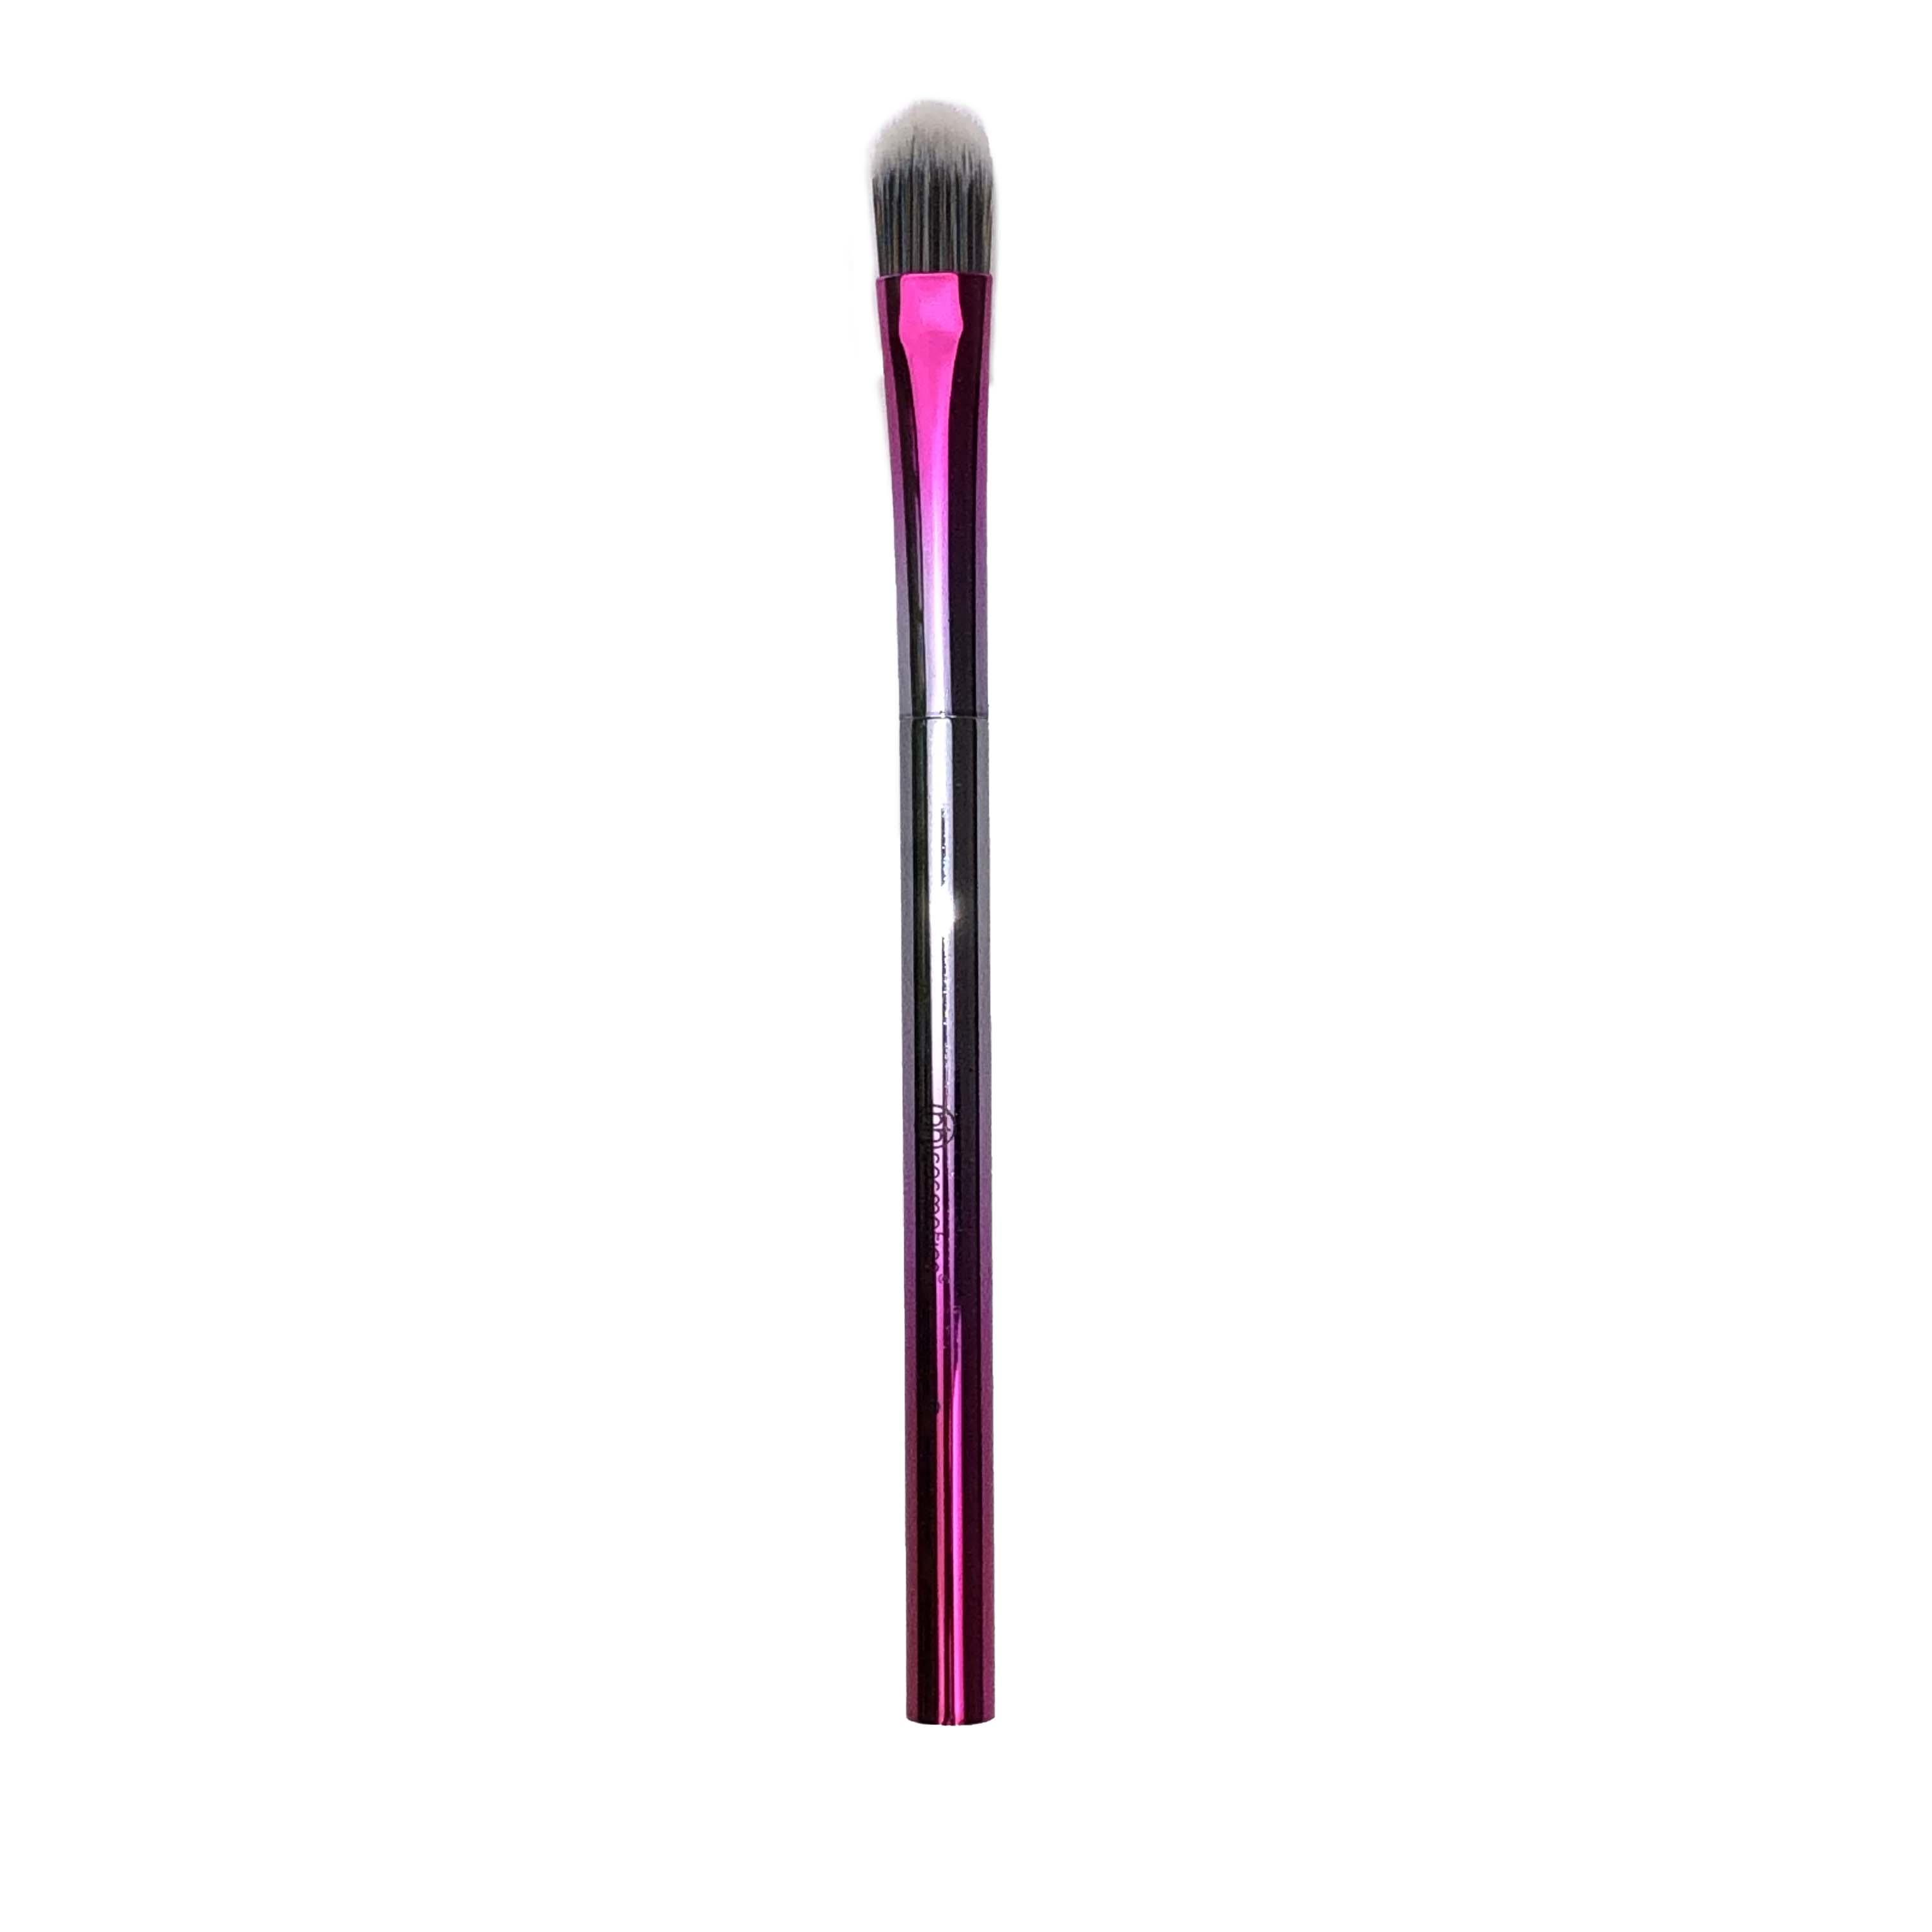 BH Cosmetics Face Concealer Brush Pink Metallic Ombre